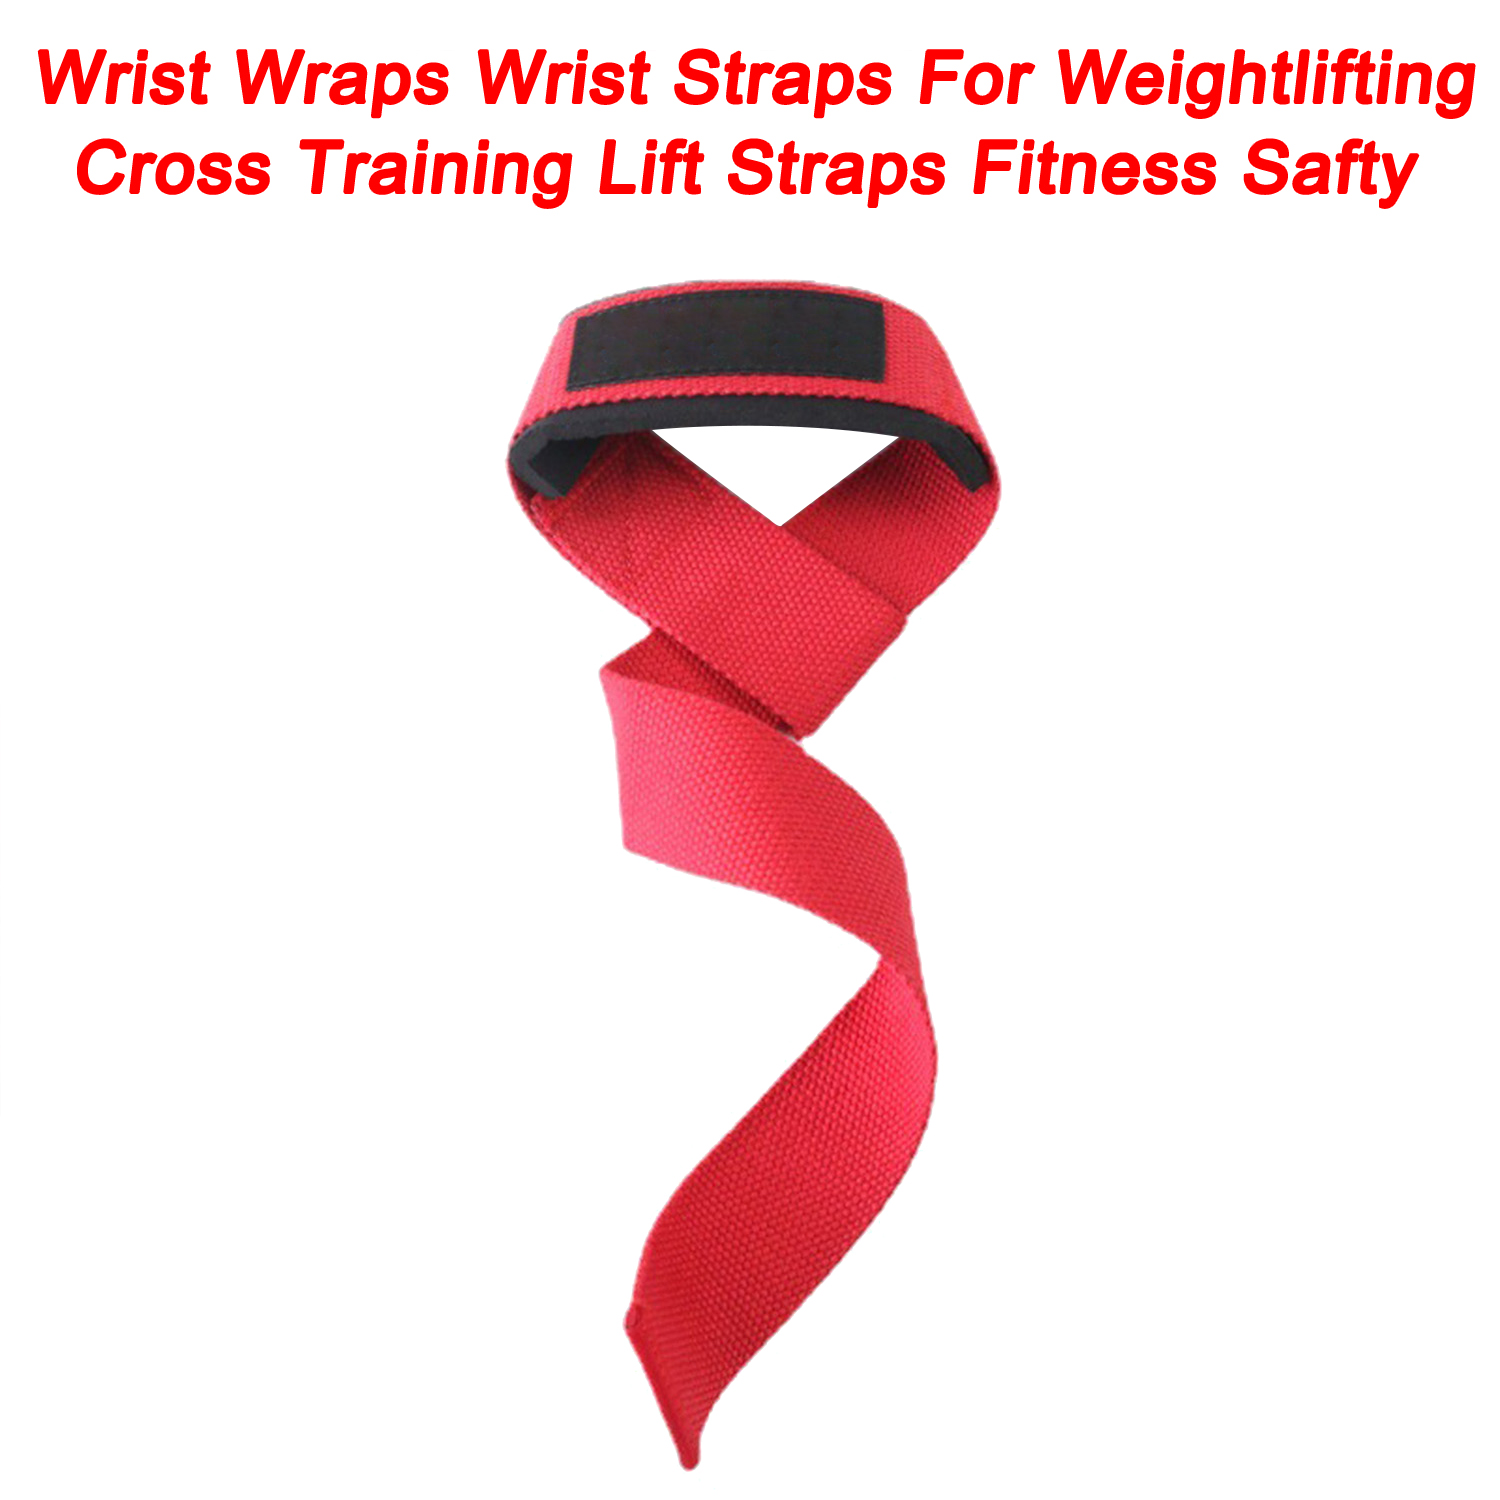 Wrist Wraps Wrist Straps For Weightlifting Cross Training Lift Straps Fitness Safty